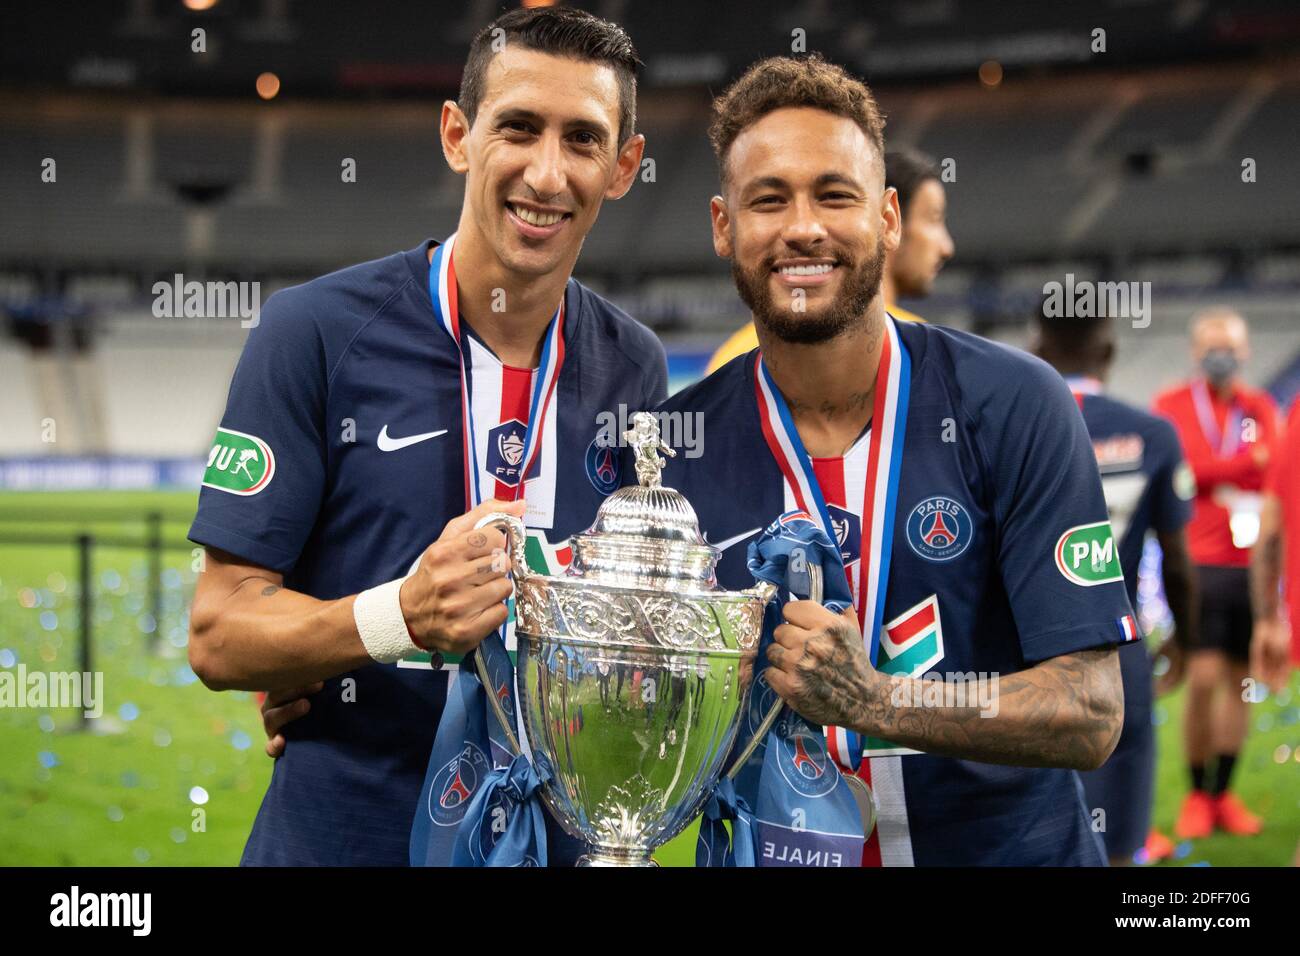 Paris Saint Germain's Neymar with Angel Di Maria celebrate with the trophy  after winning the French Cup during the Final between AS Saint-Etienne and  Paris Saint Germain at Stade de France on